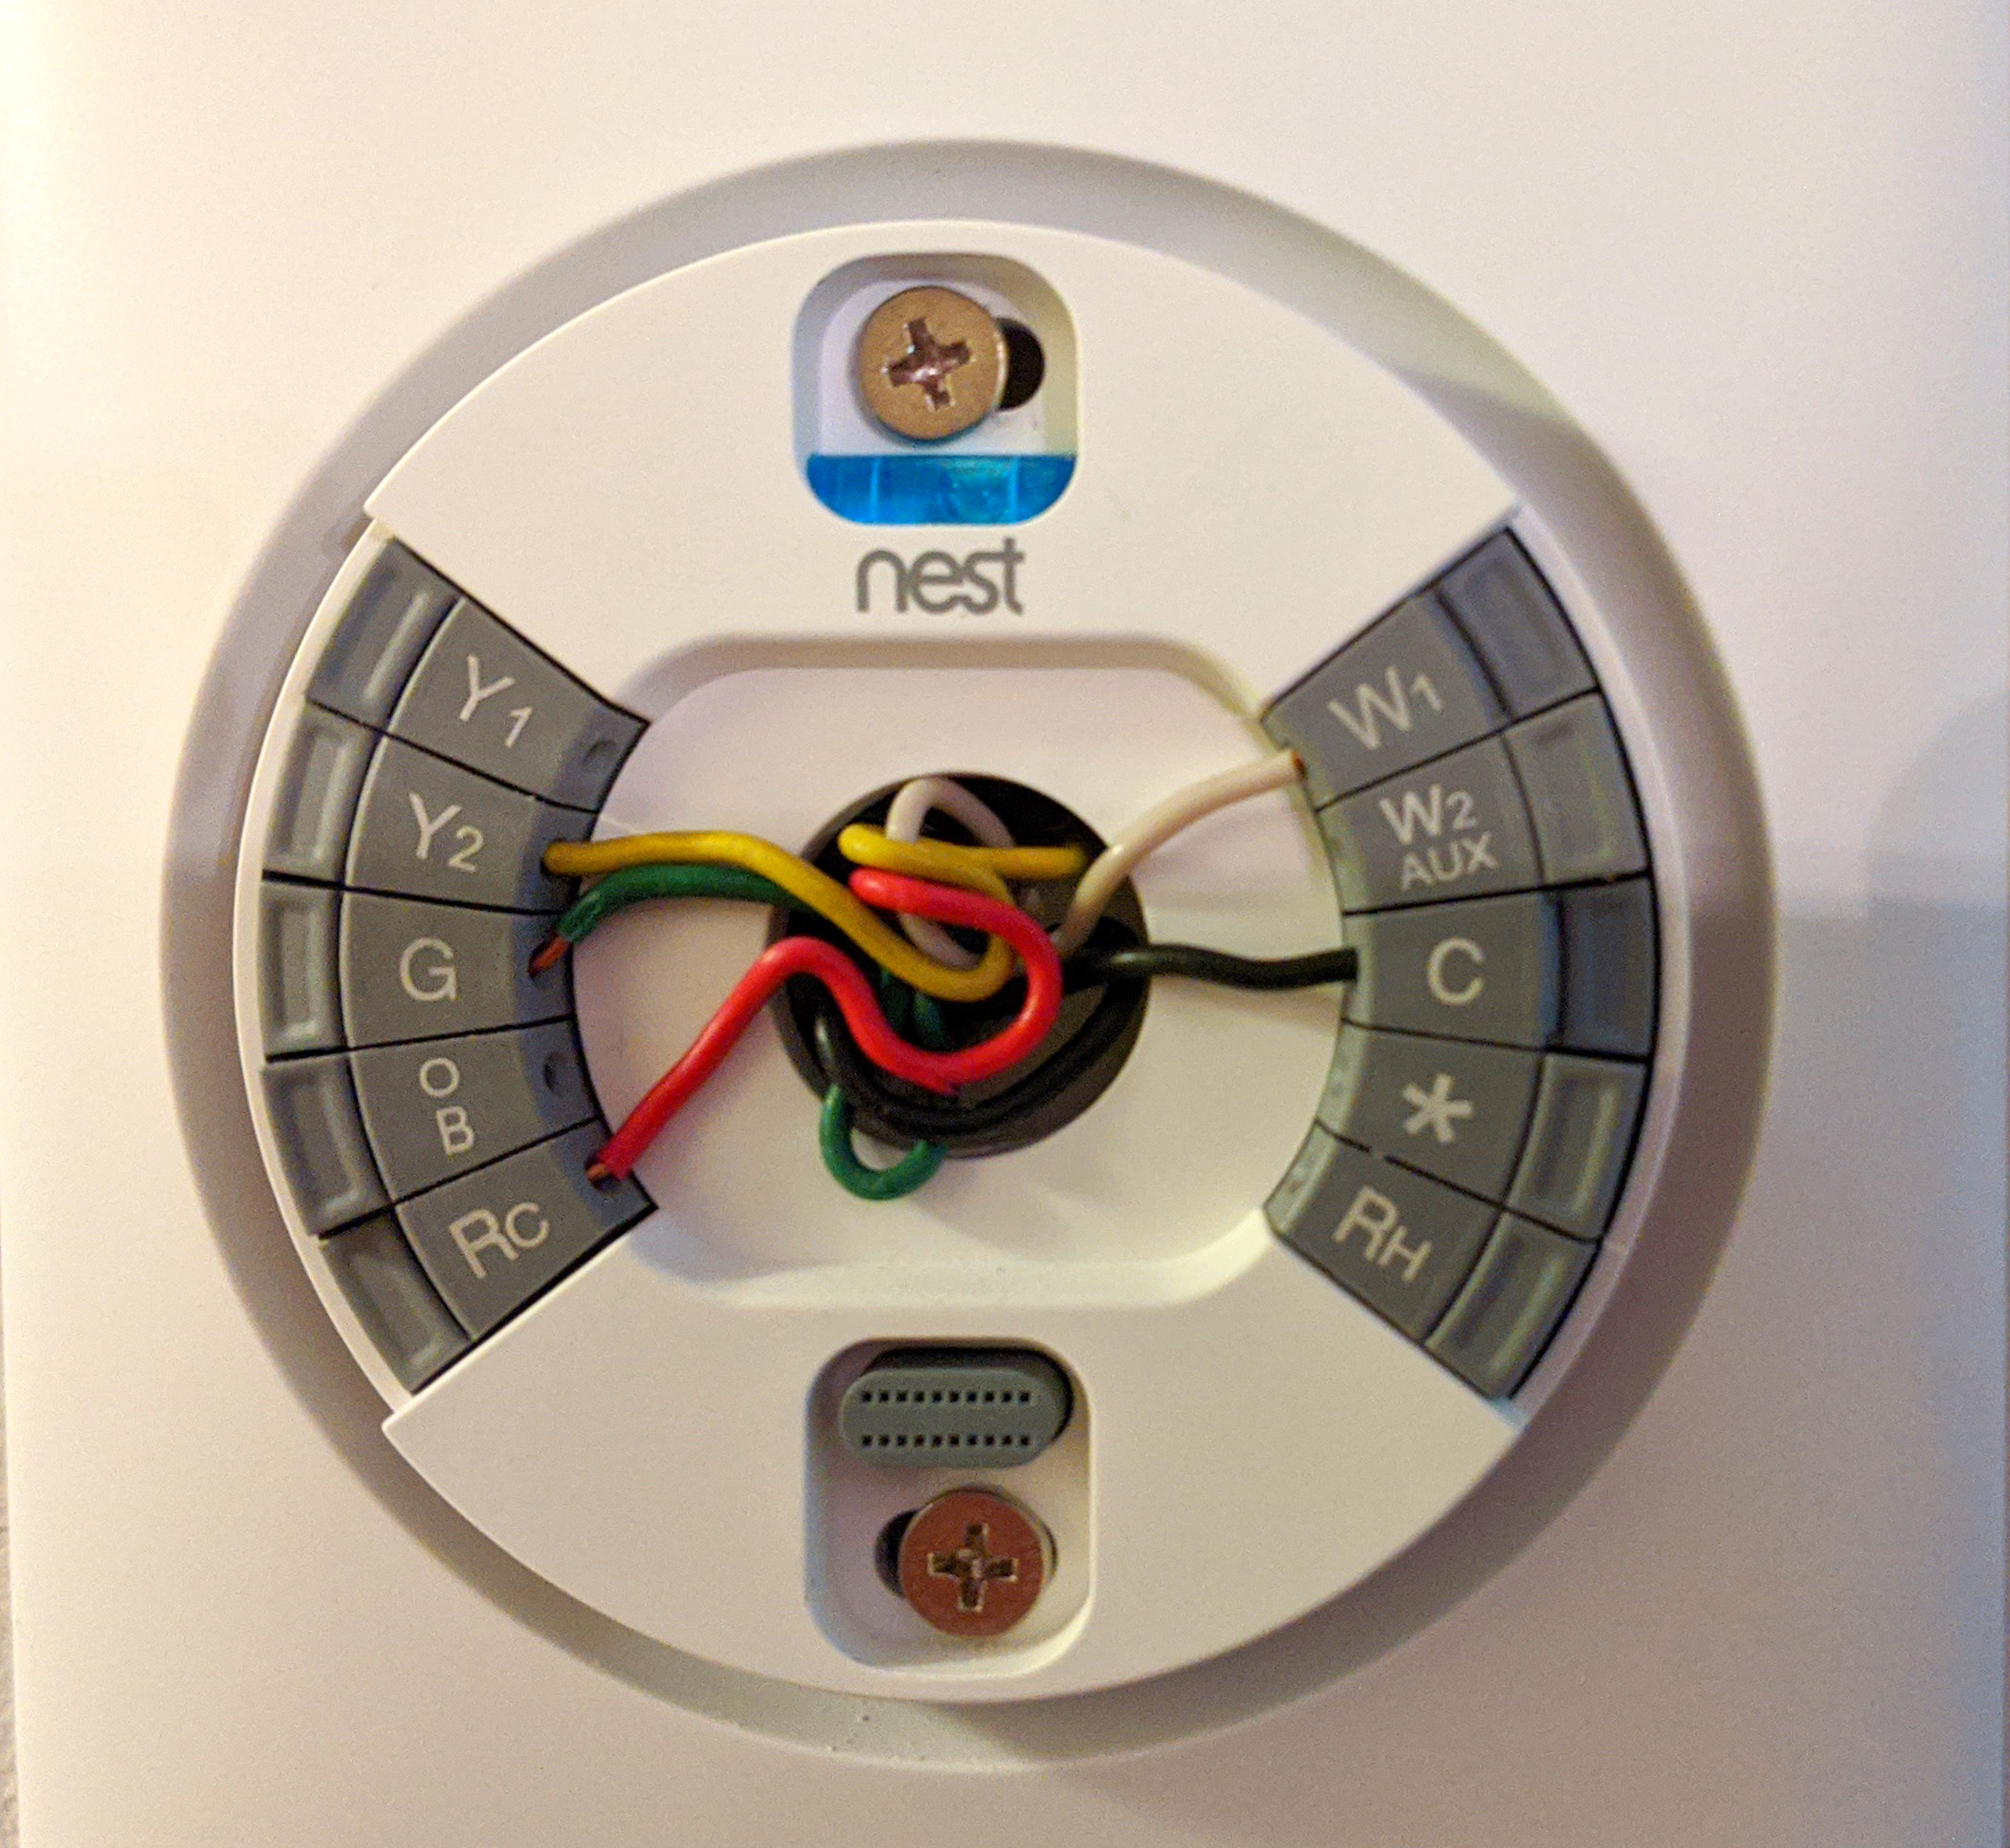 y2 wire with no y1 wire - Google Nest Community